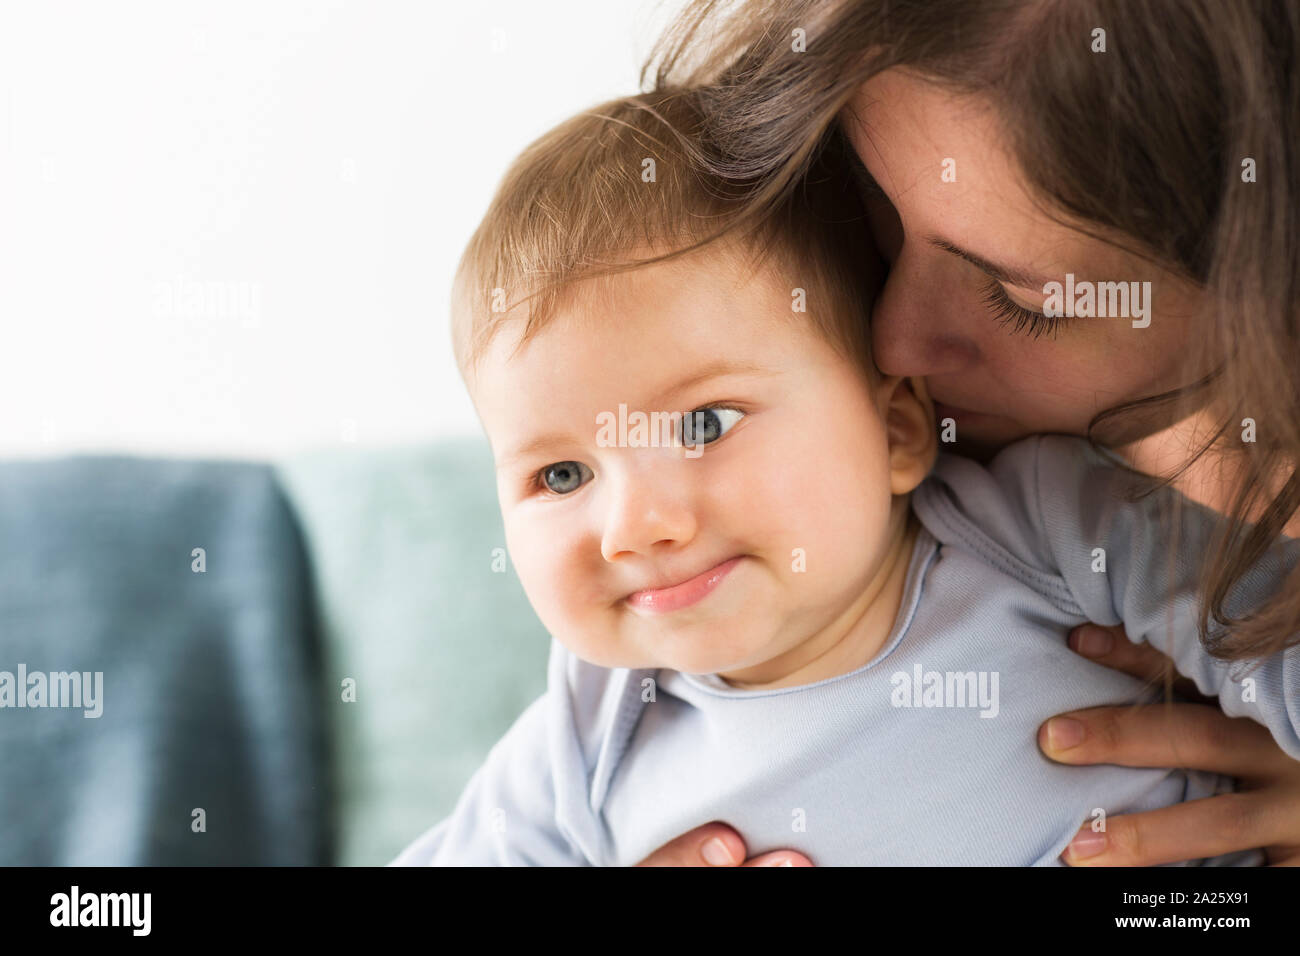 Tender moments between mother and son. Stock Photo